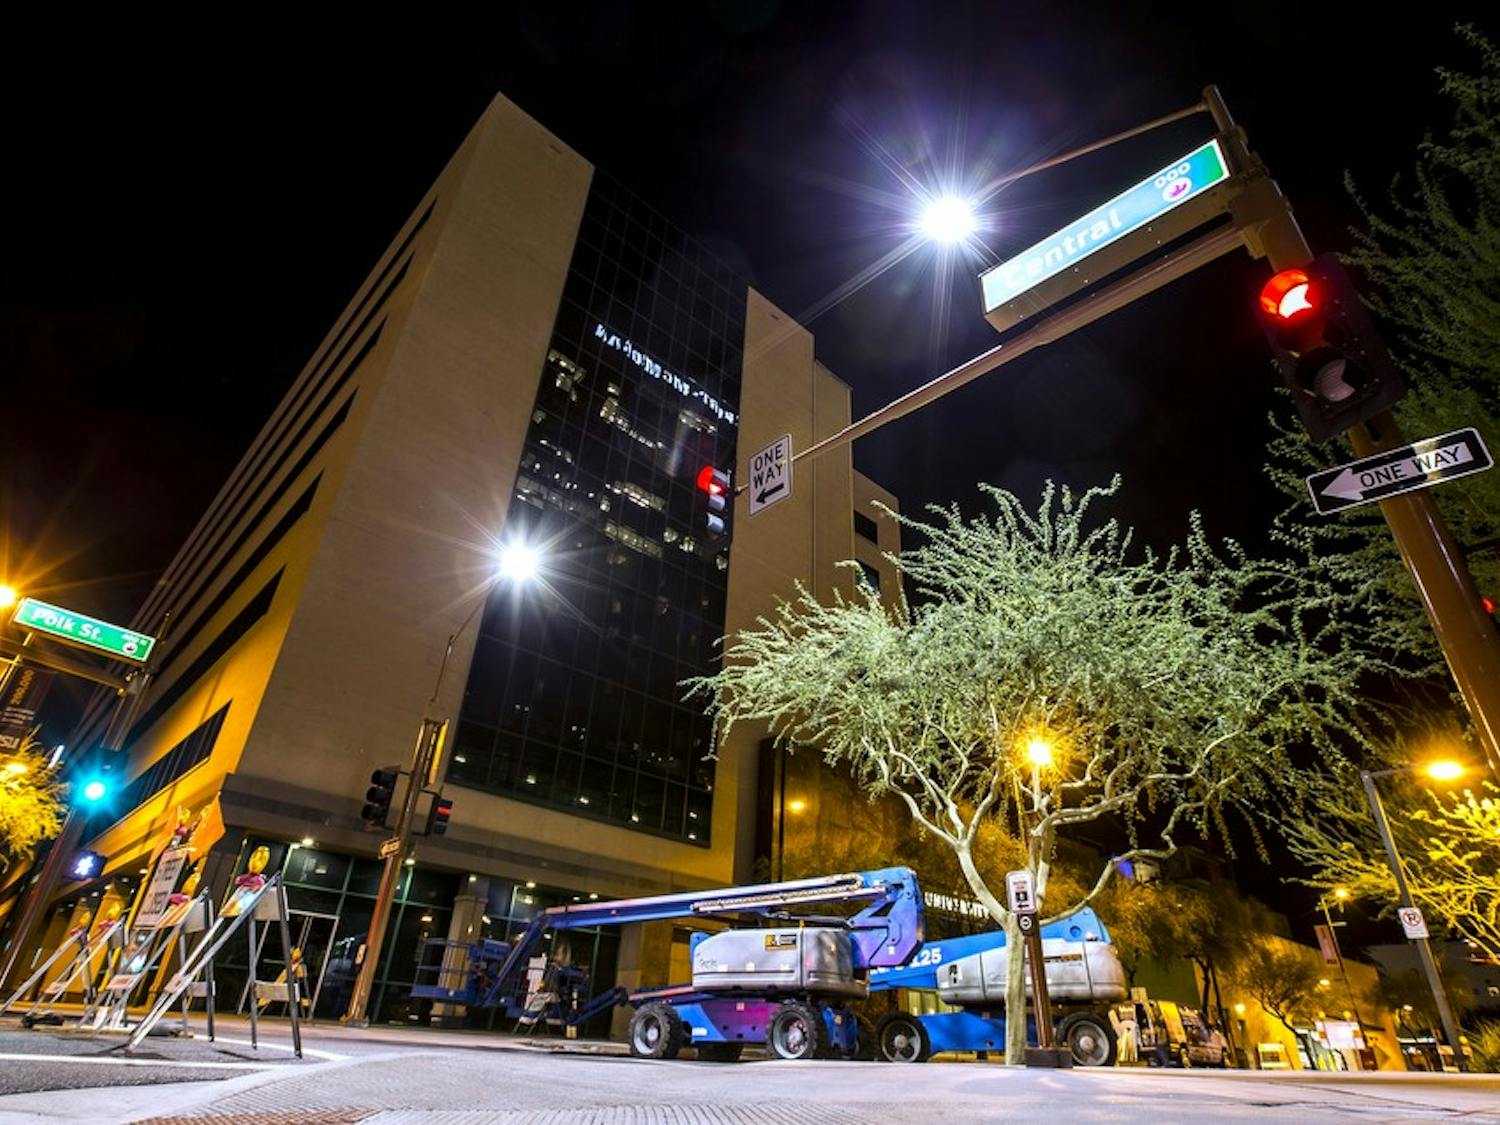 Construction equipment waits at the base of ASU's University Center in Downtown Phoenix on Friday, Oct. 9, 2015. Large banners will be hung from the south side of the University Center building this week as part of an ASU promotional campaign. 